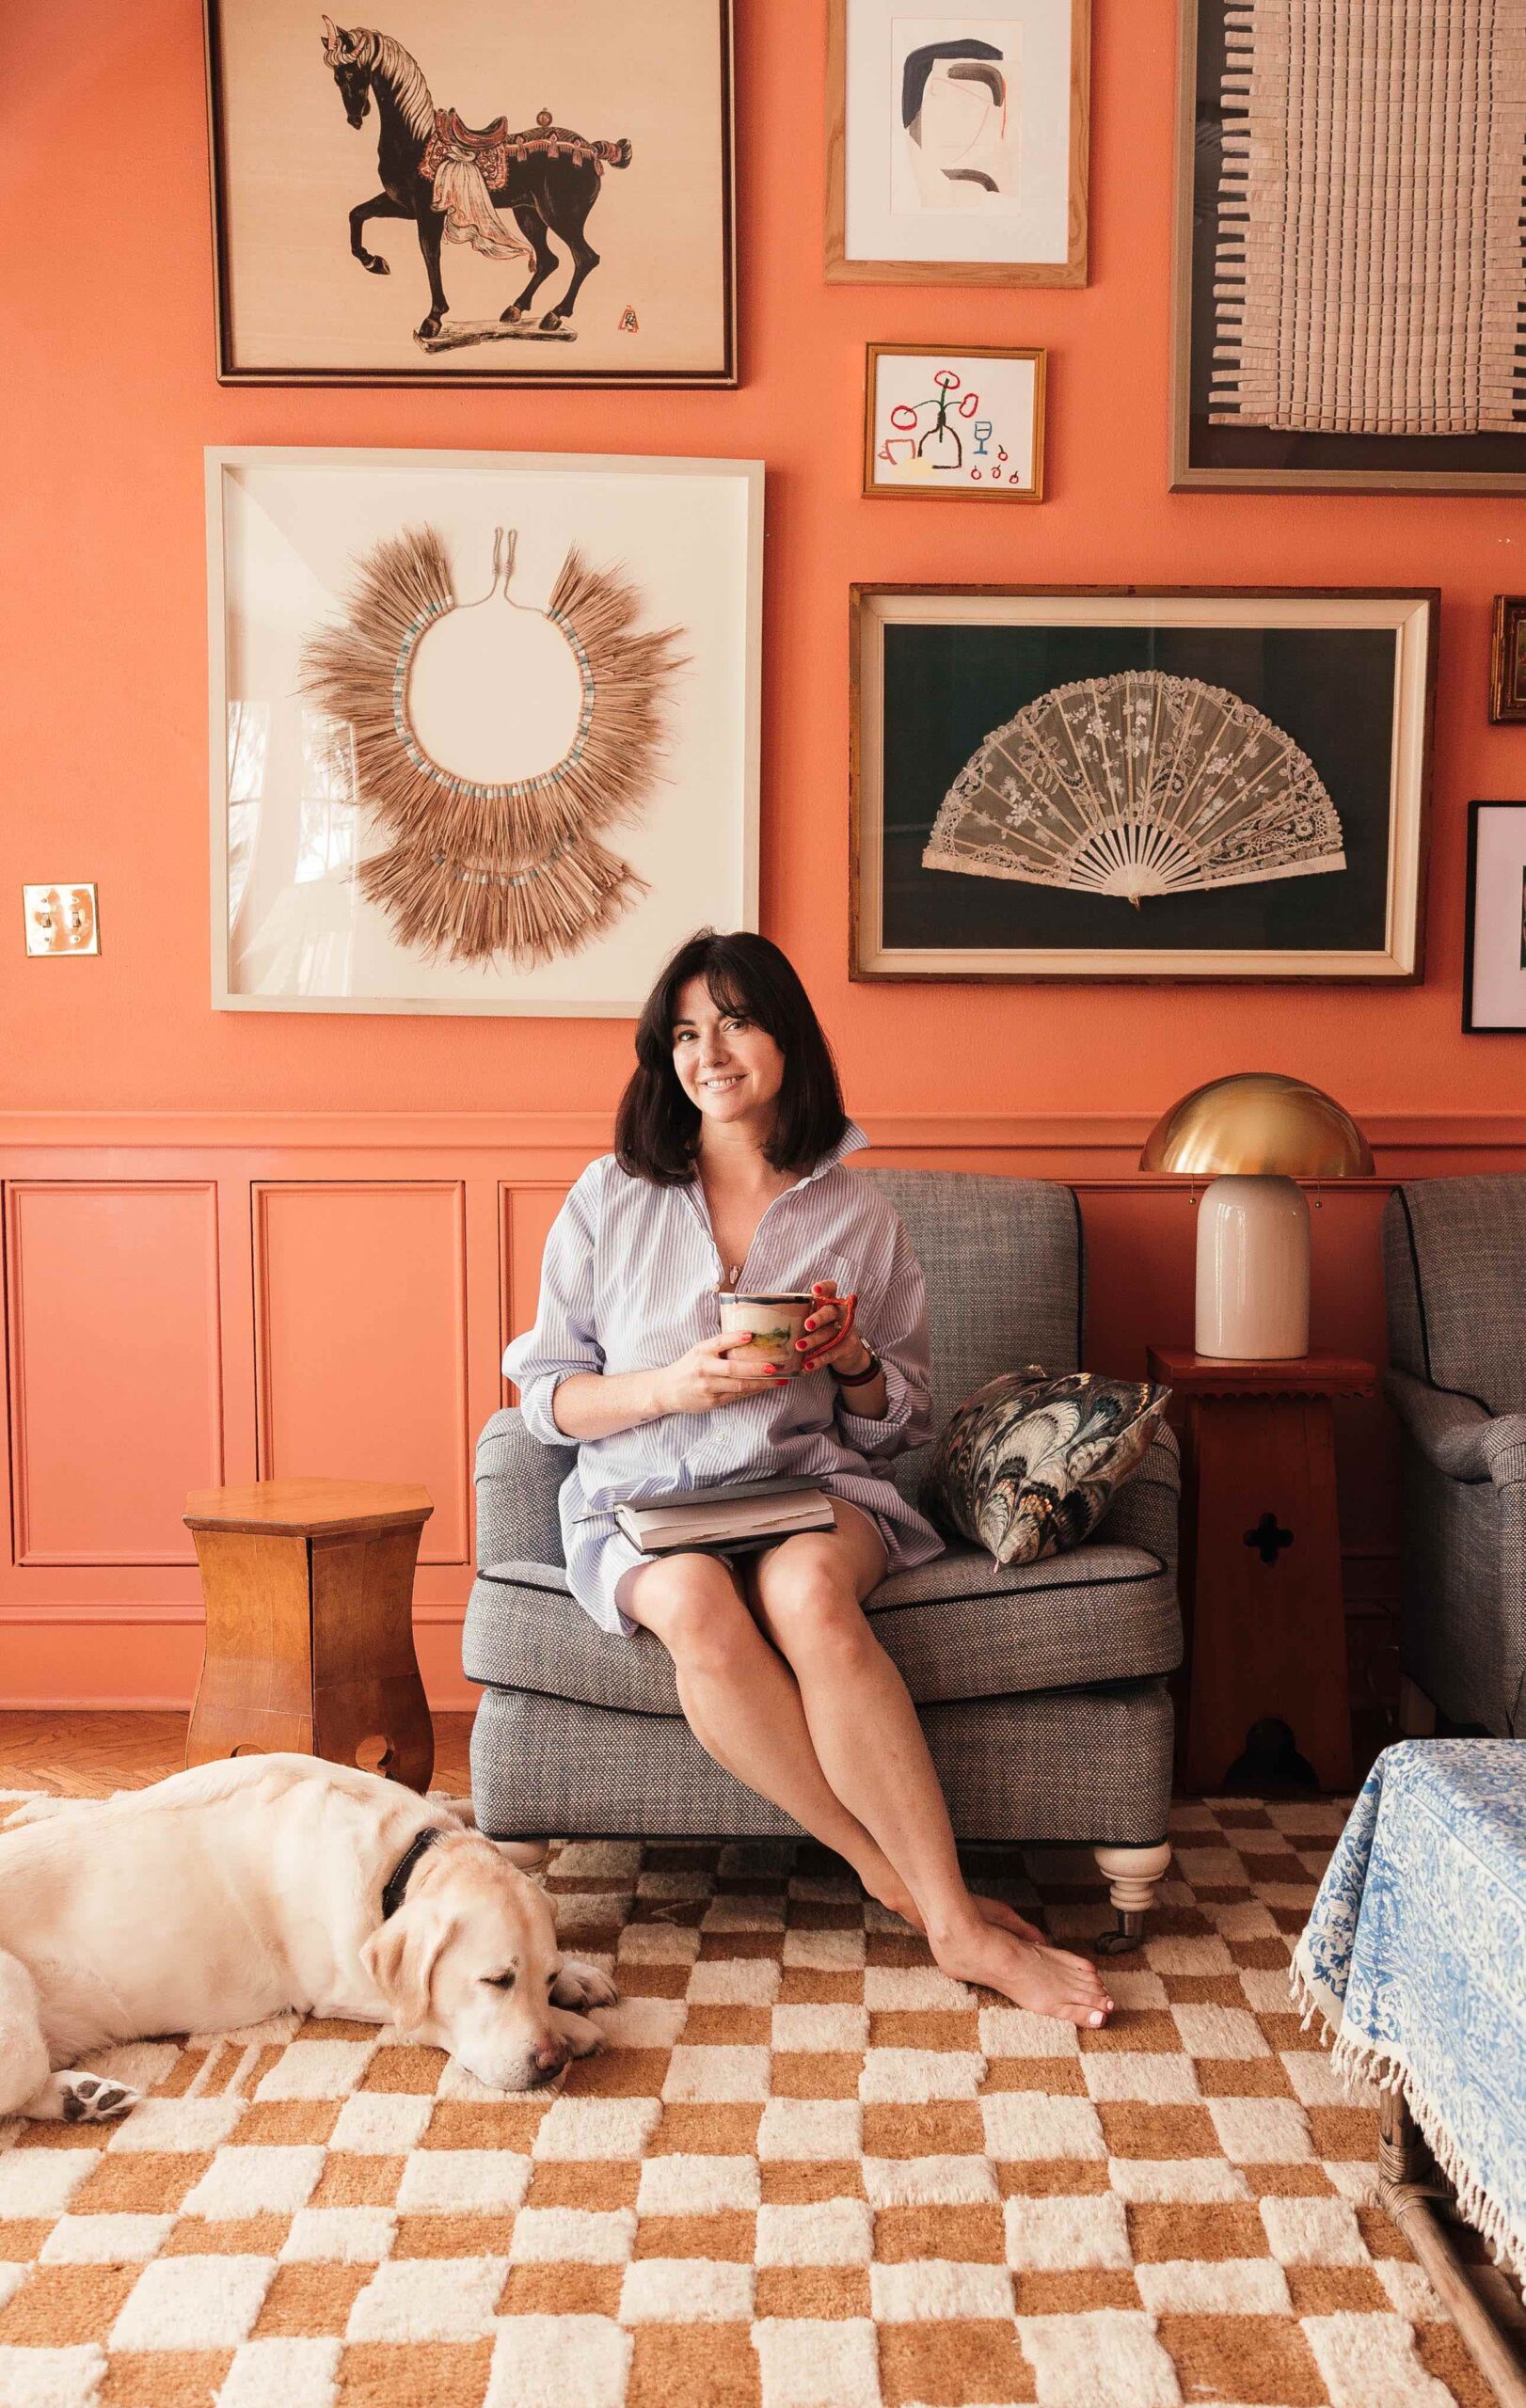 A woman holding a cup of coffee is sitting on a plush chair with a yellow lab sleeping at her feet. The wall behind her is painted a peach color and has a large gallery wall on display. The rug on the floor is in a brown and cream checkerboard pattern.